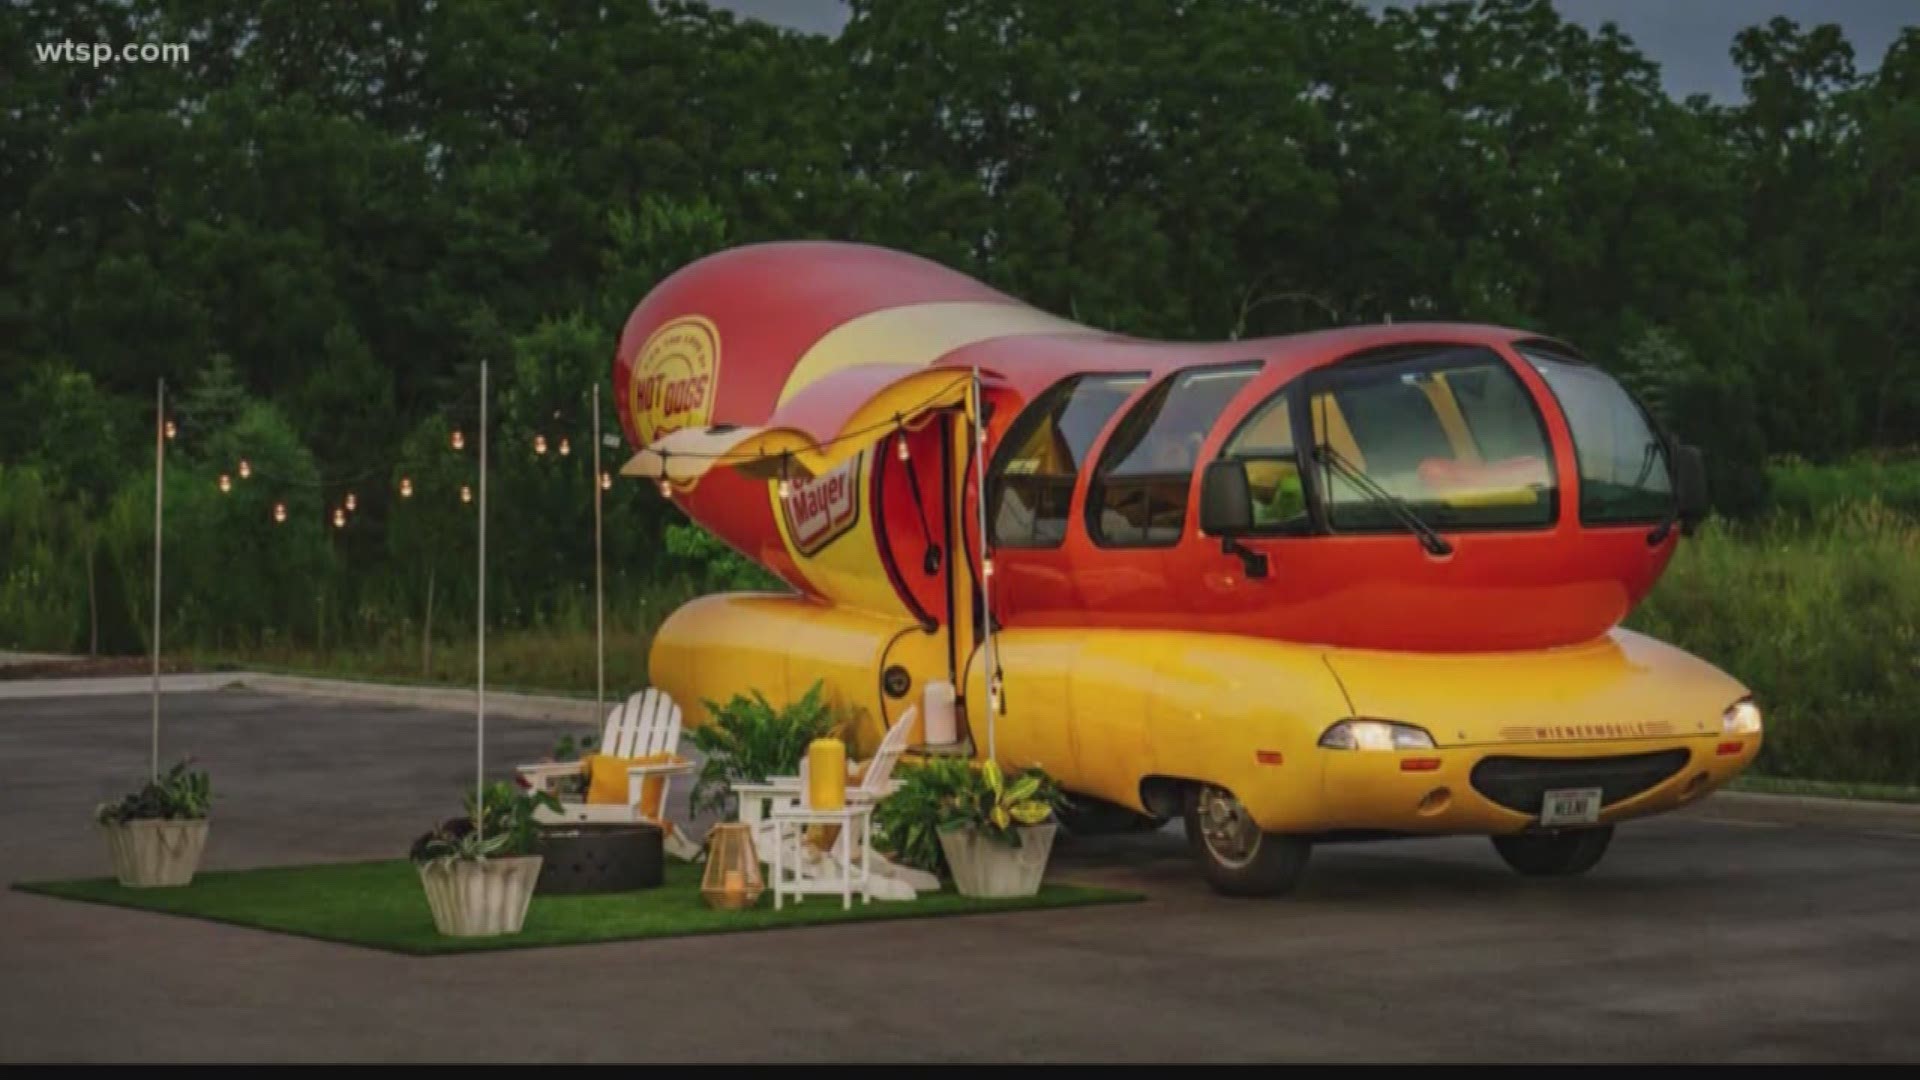 Have you ever wanted to eat hot dogs while living inside a giant one on wheels? Well, now you can, thanks to Oscar Mayer and Airbnb.

The Oscar Mayer Wienermobile has a listing on Airbnb, the home-sharing and lodging site. Beginning July 24, Wienermobile fans will be able to book a one-night stay in the iconic vehicle for Aug. 1, 2 or 3. https://on.wtsp.com/2M4XGau